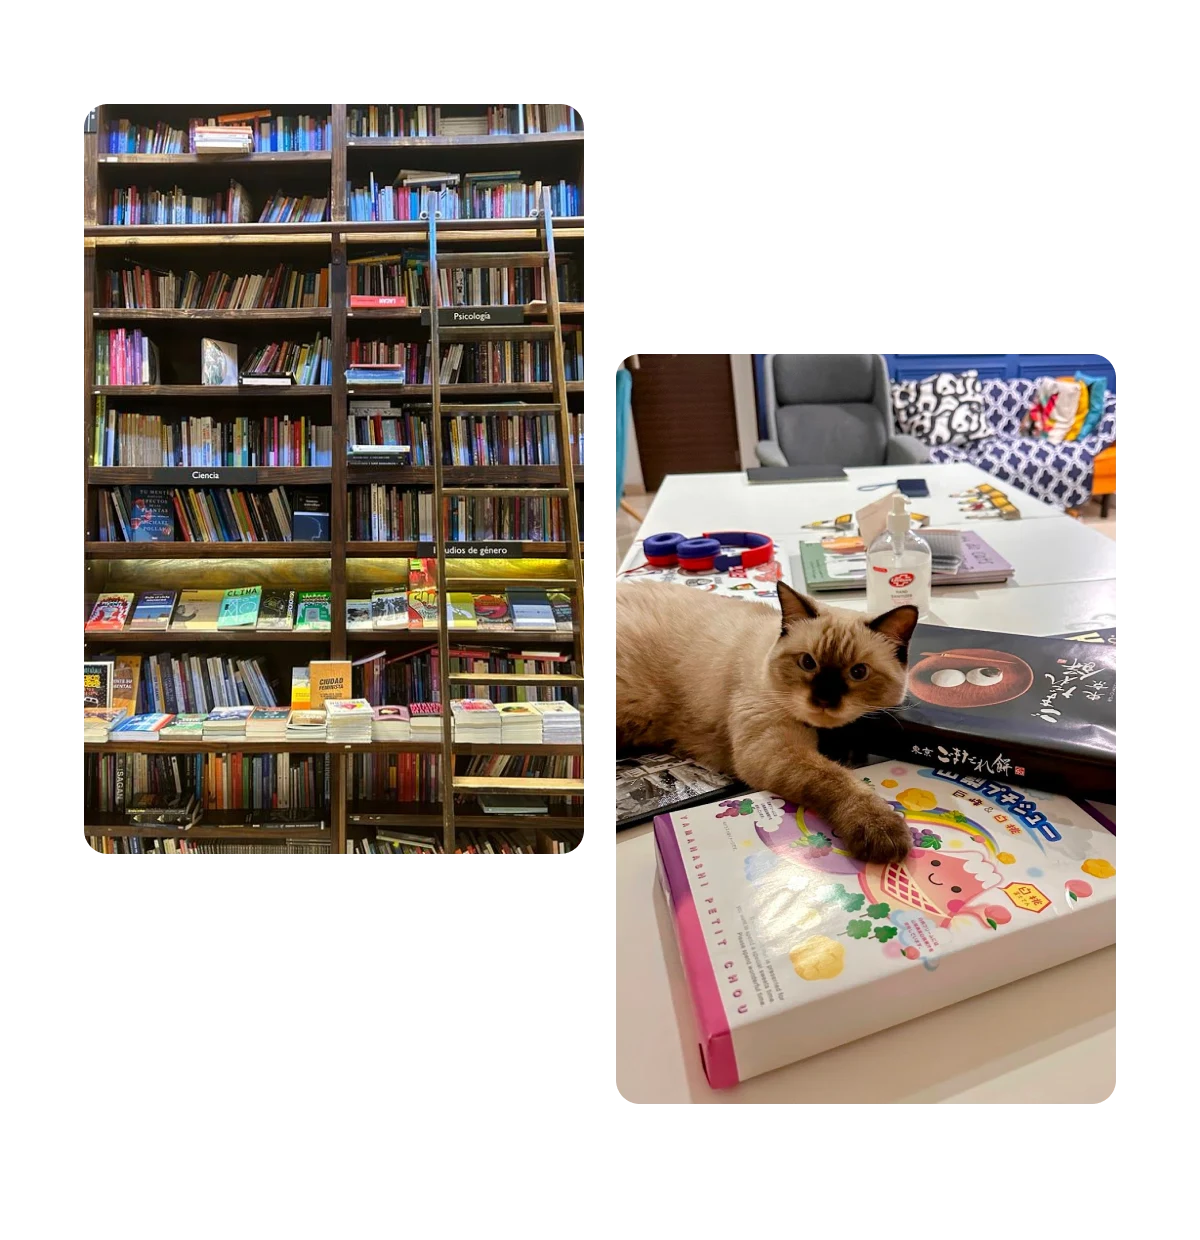 Two pins, library, cat laying on activity materials